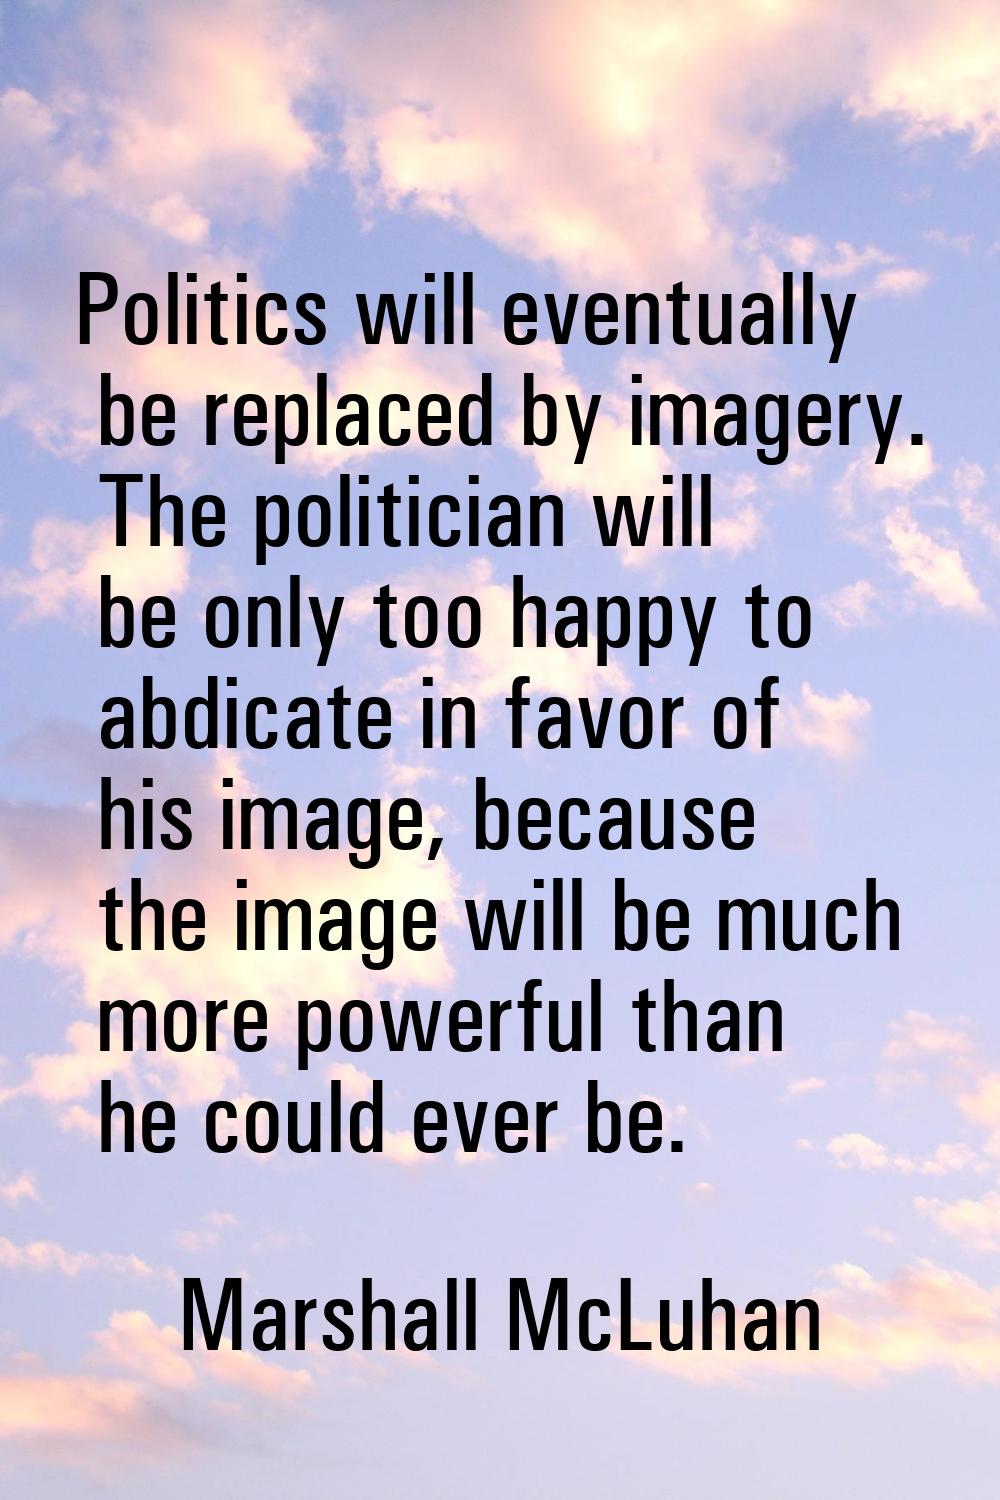 Politics will eventually be replaced by imagery. The politician will be only too happy to abdicate 